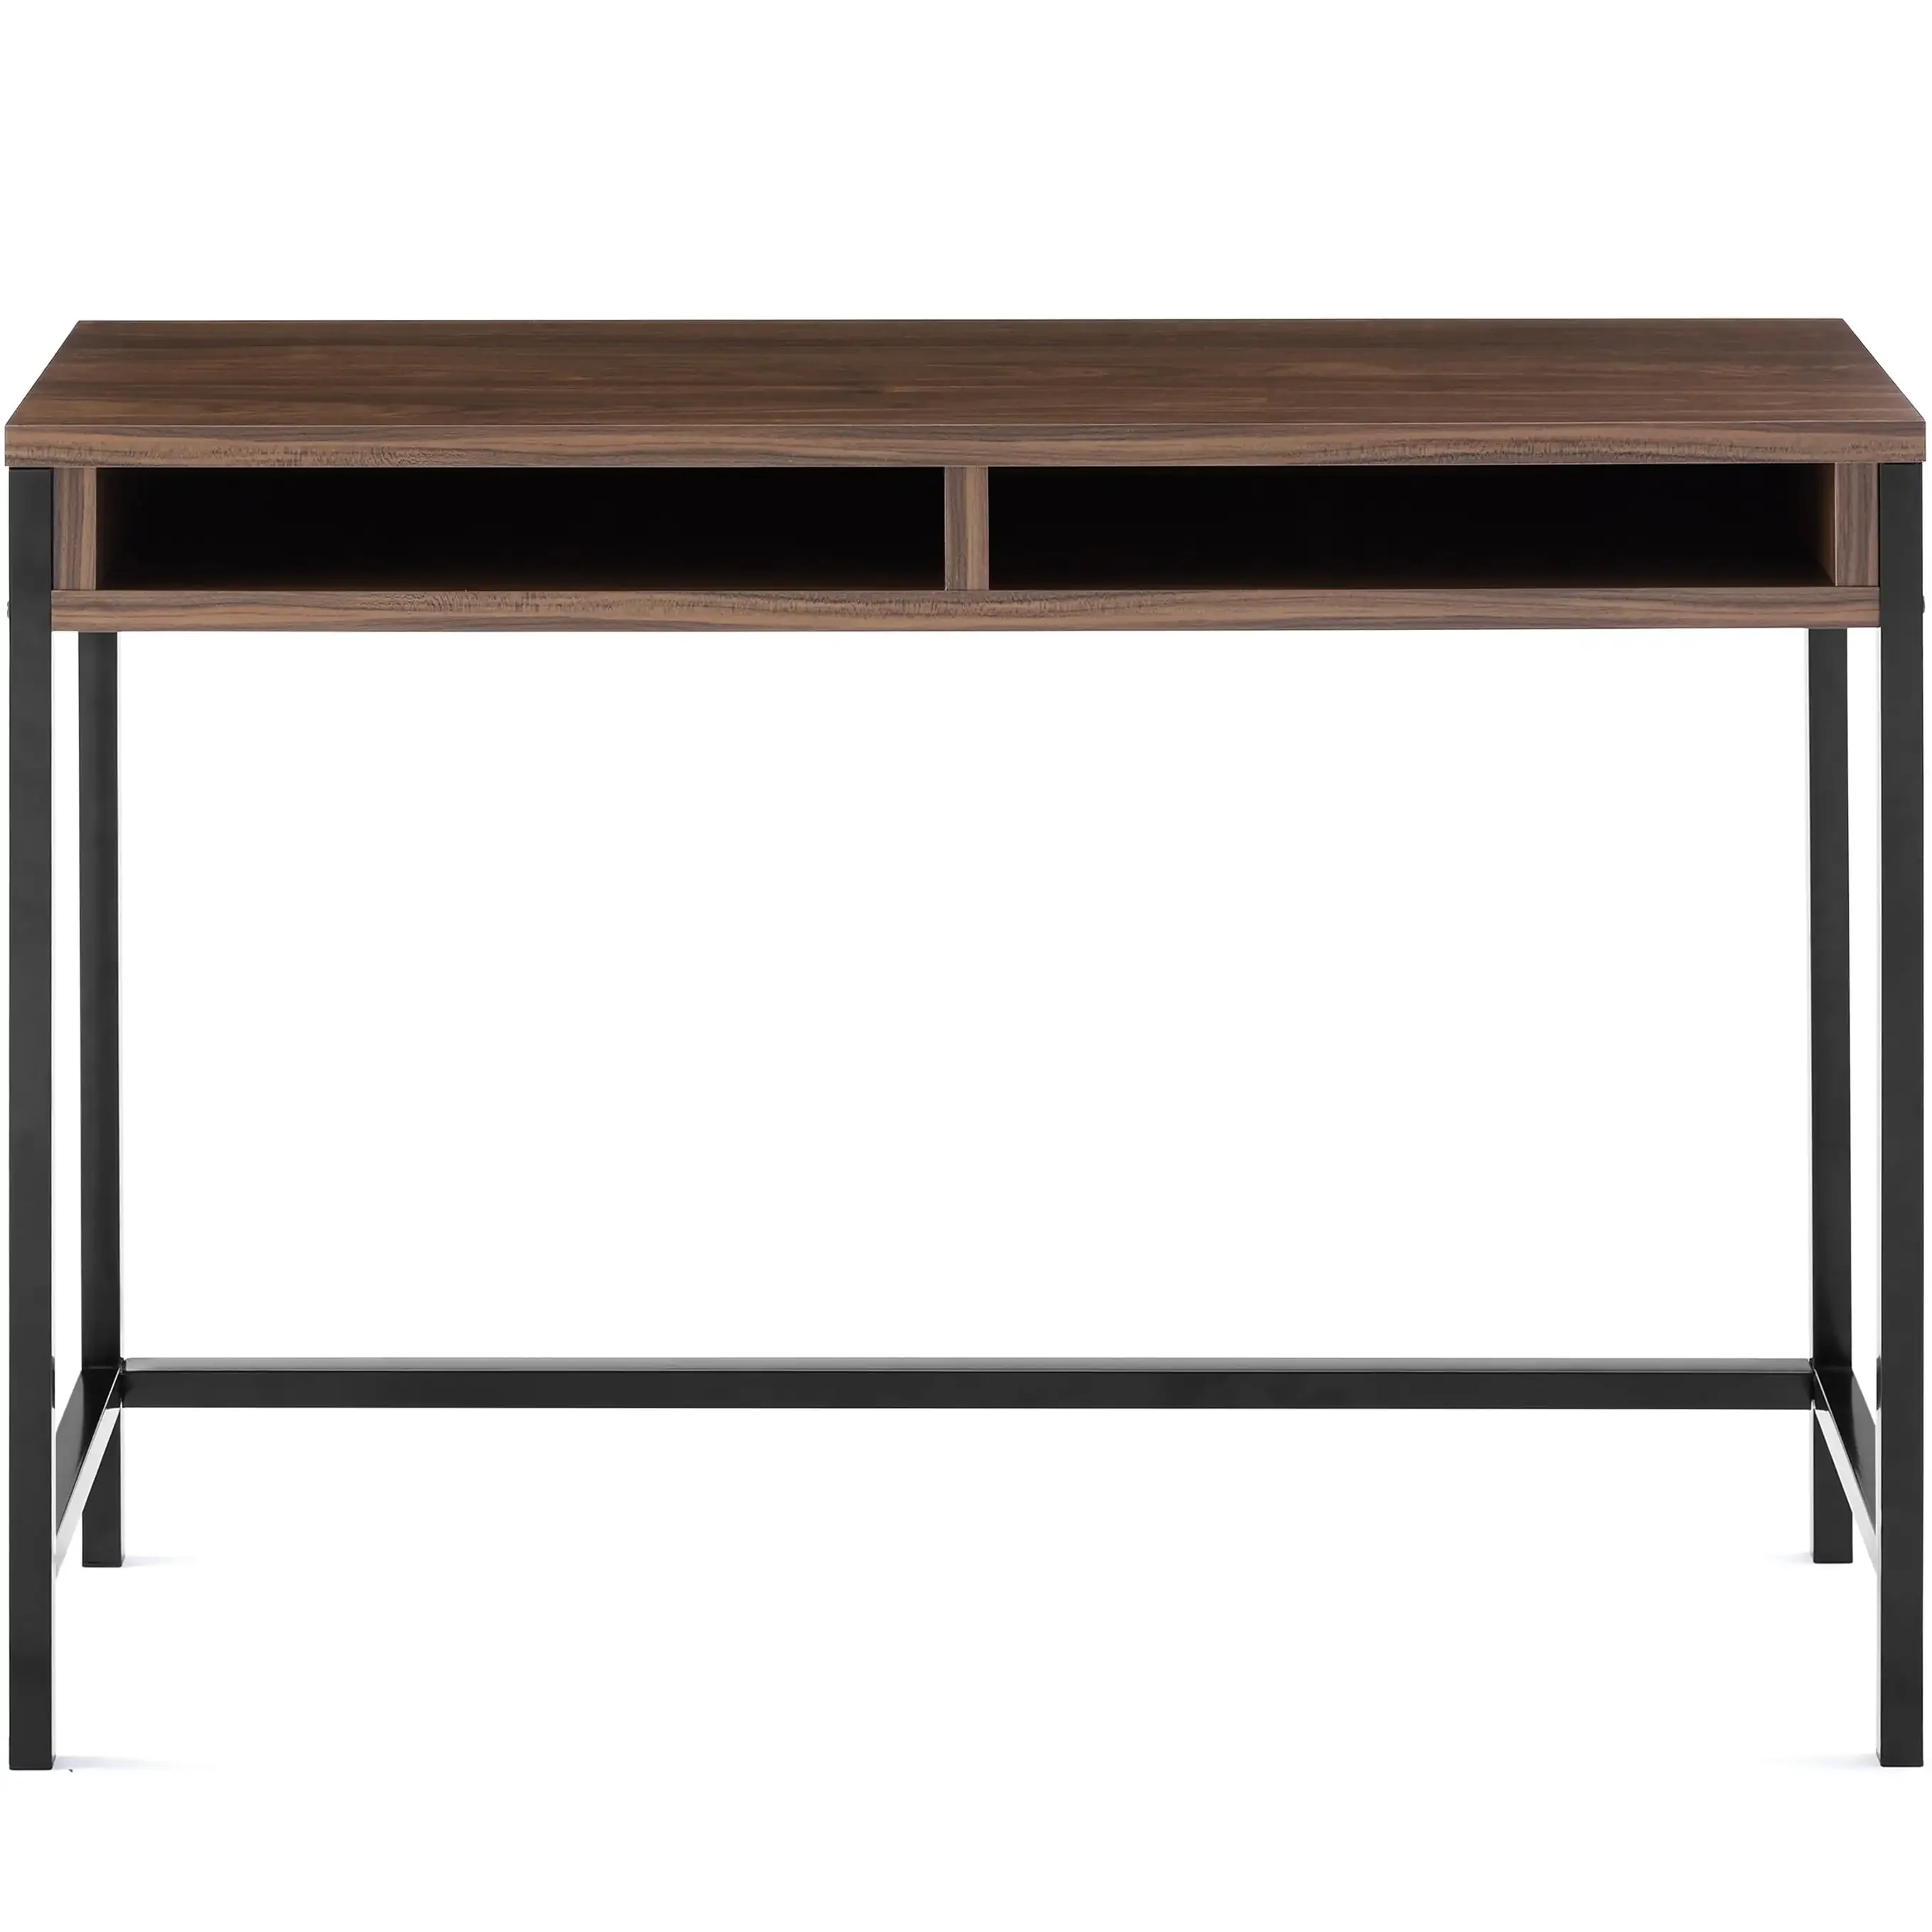 

Mainstays Sumpter Park Student Desk, Canyon Walnut school furniture college student desk study table for students furniture